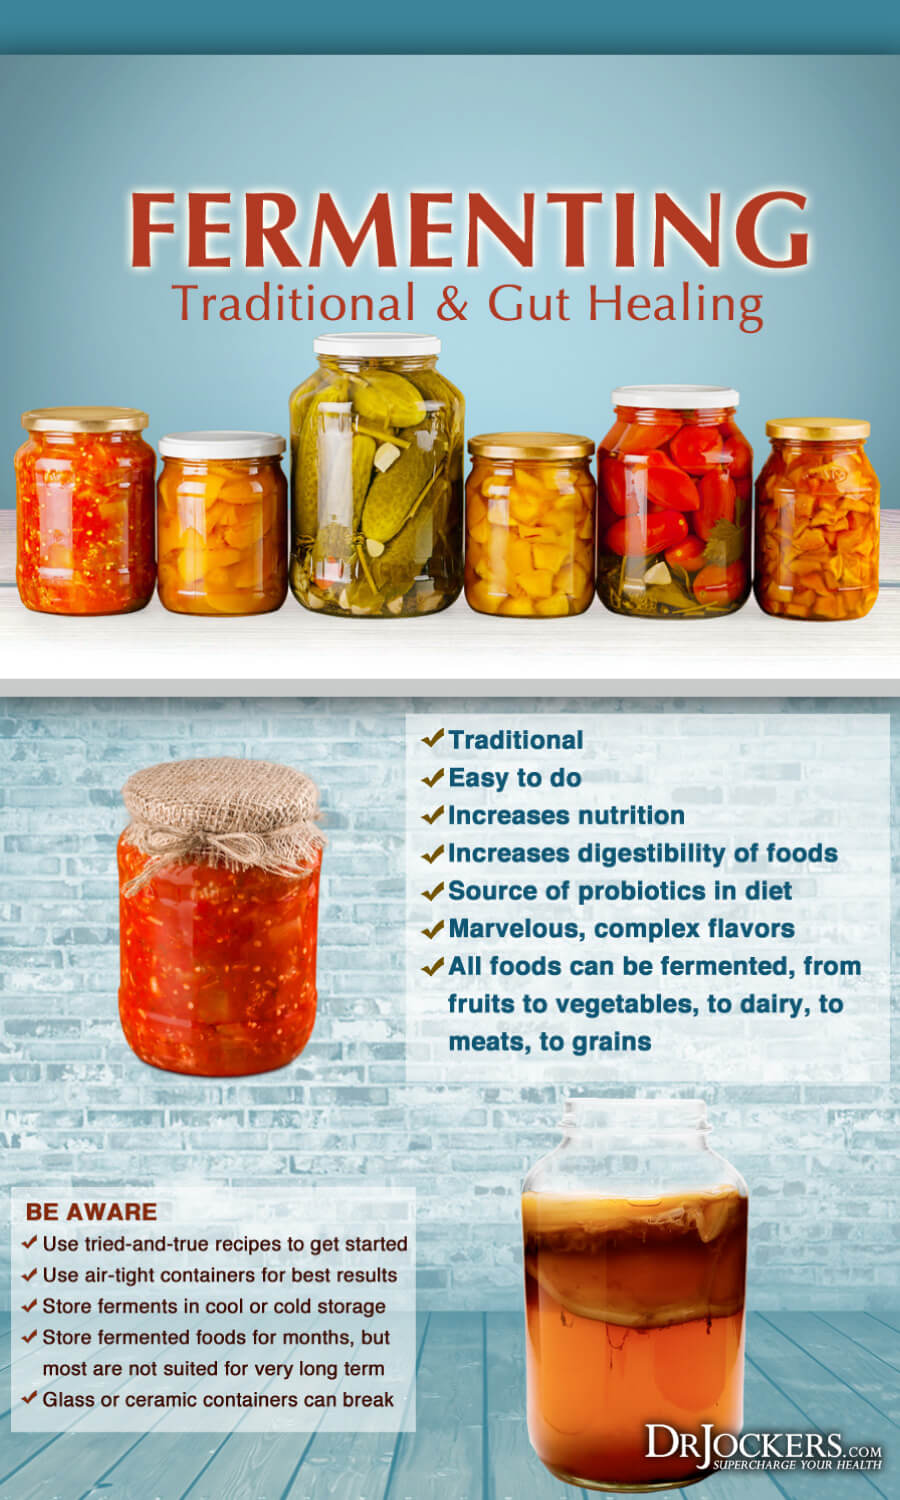 Fermented Foods, Top 10 Best Fermented Foods to Heal Your Gut